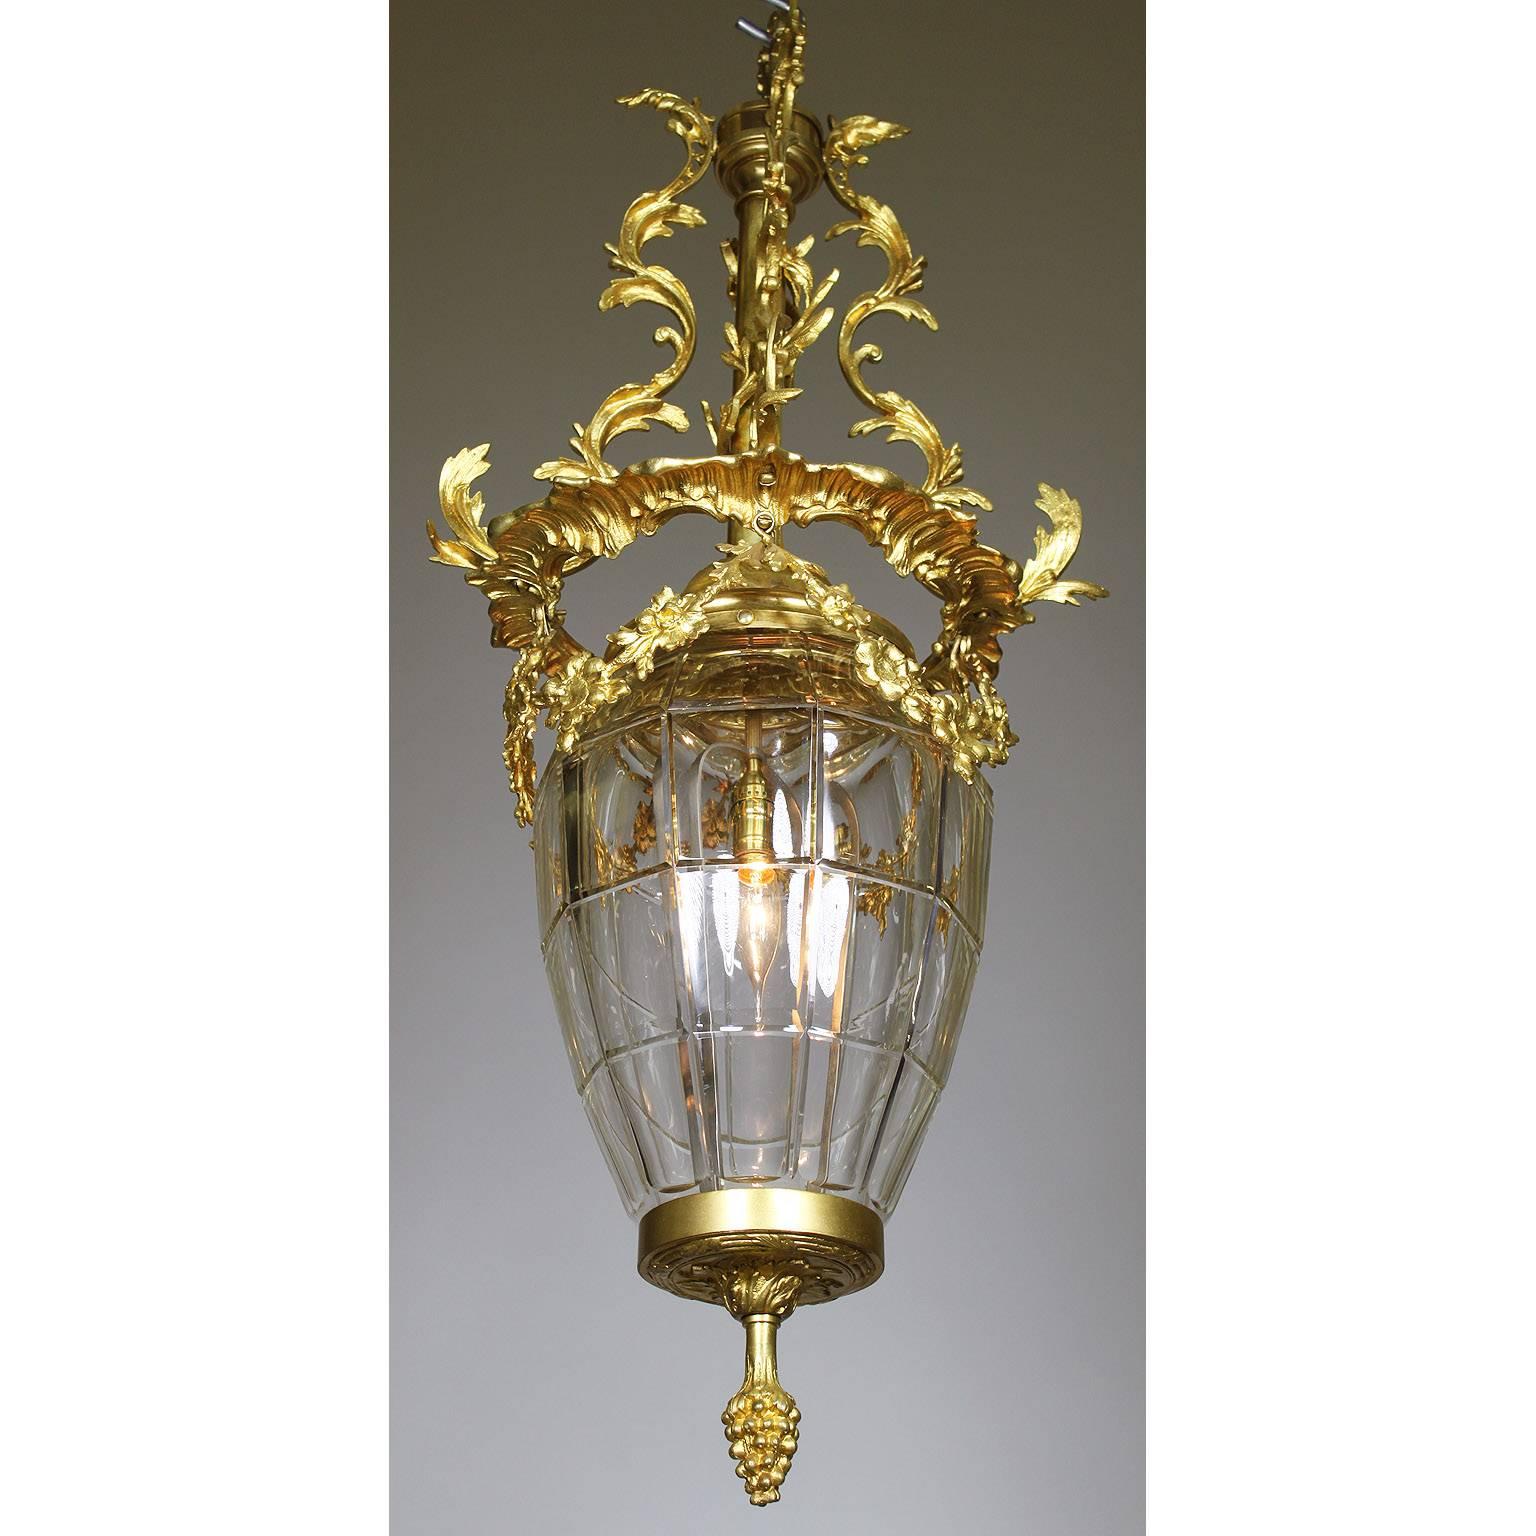 An ornate French 19th-20th century gilt bronze and gilt-metal molded glass 